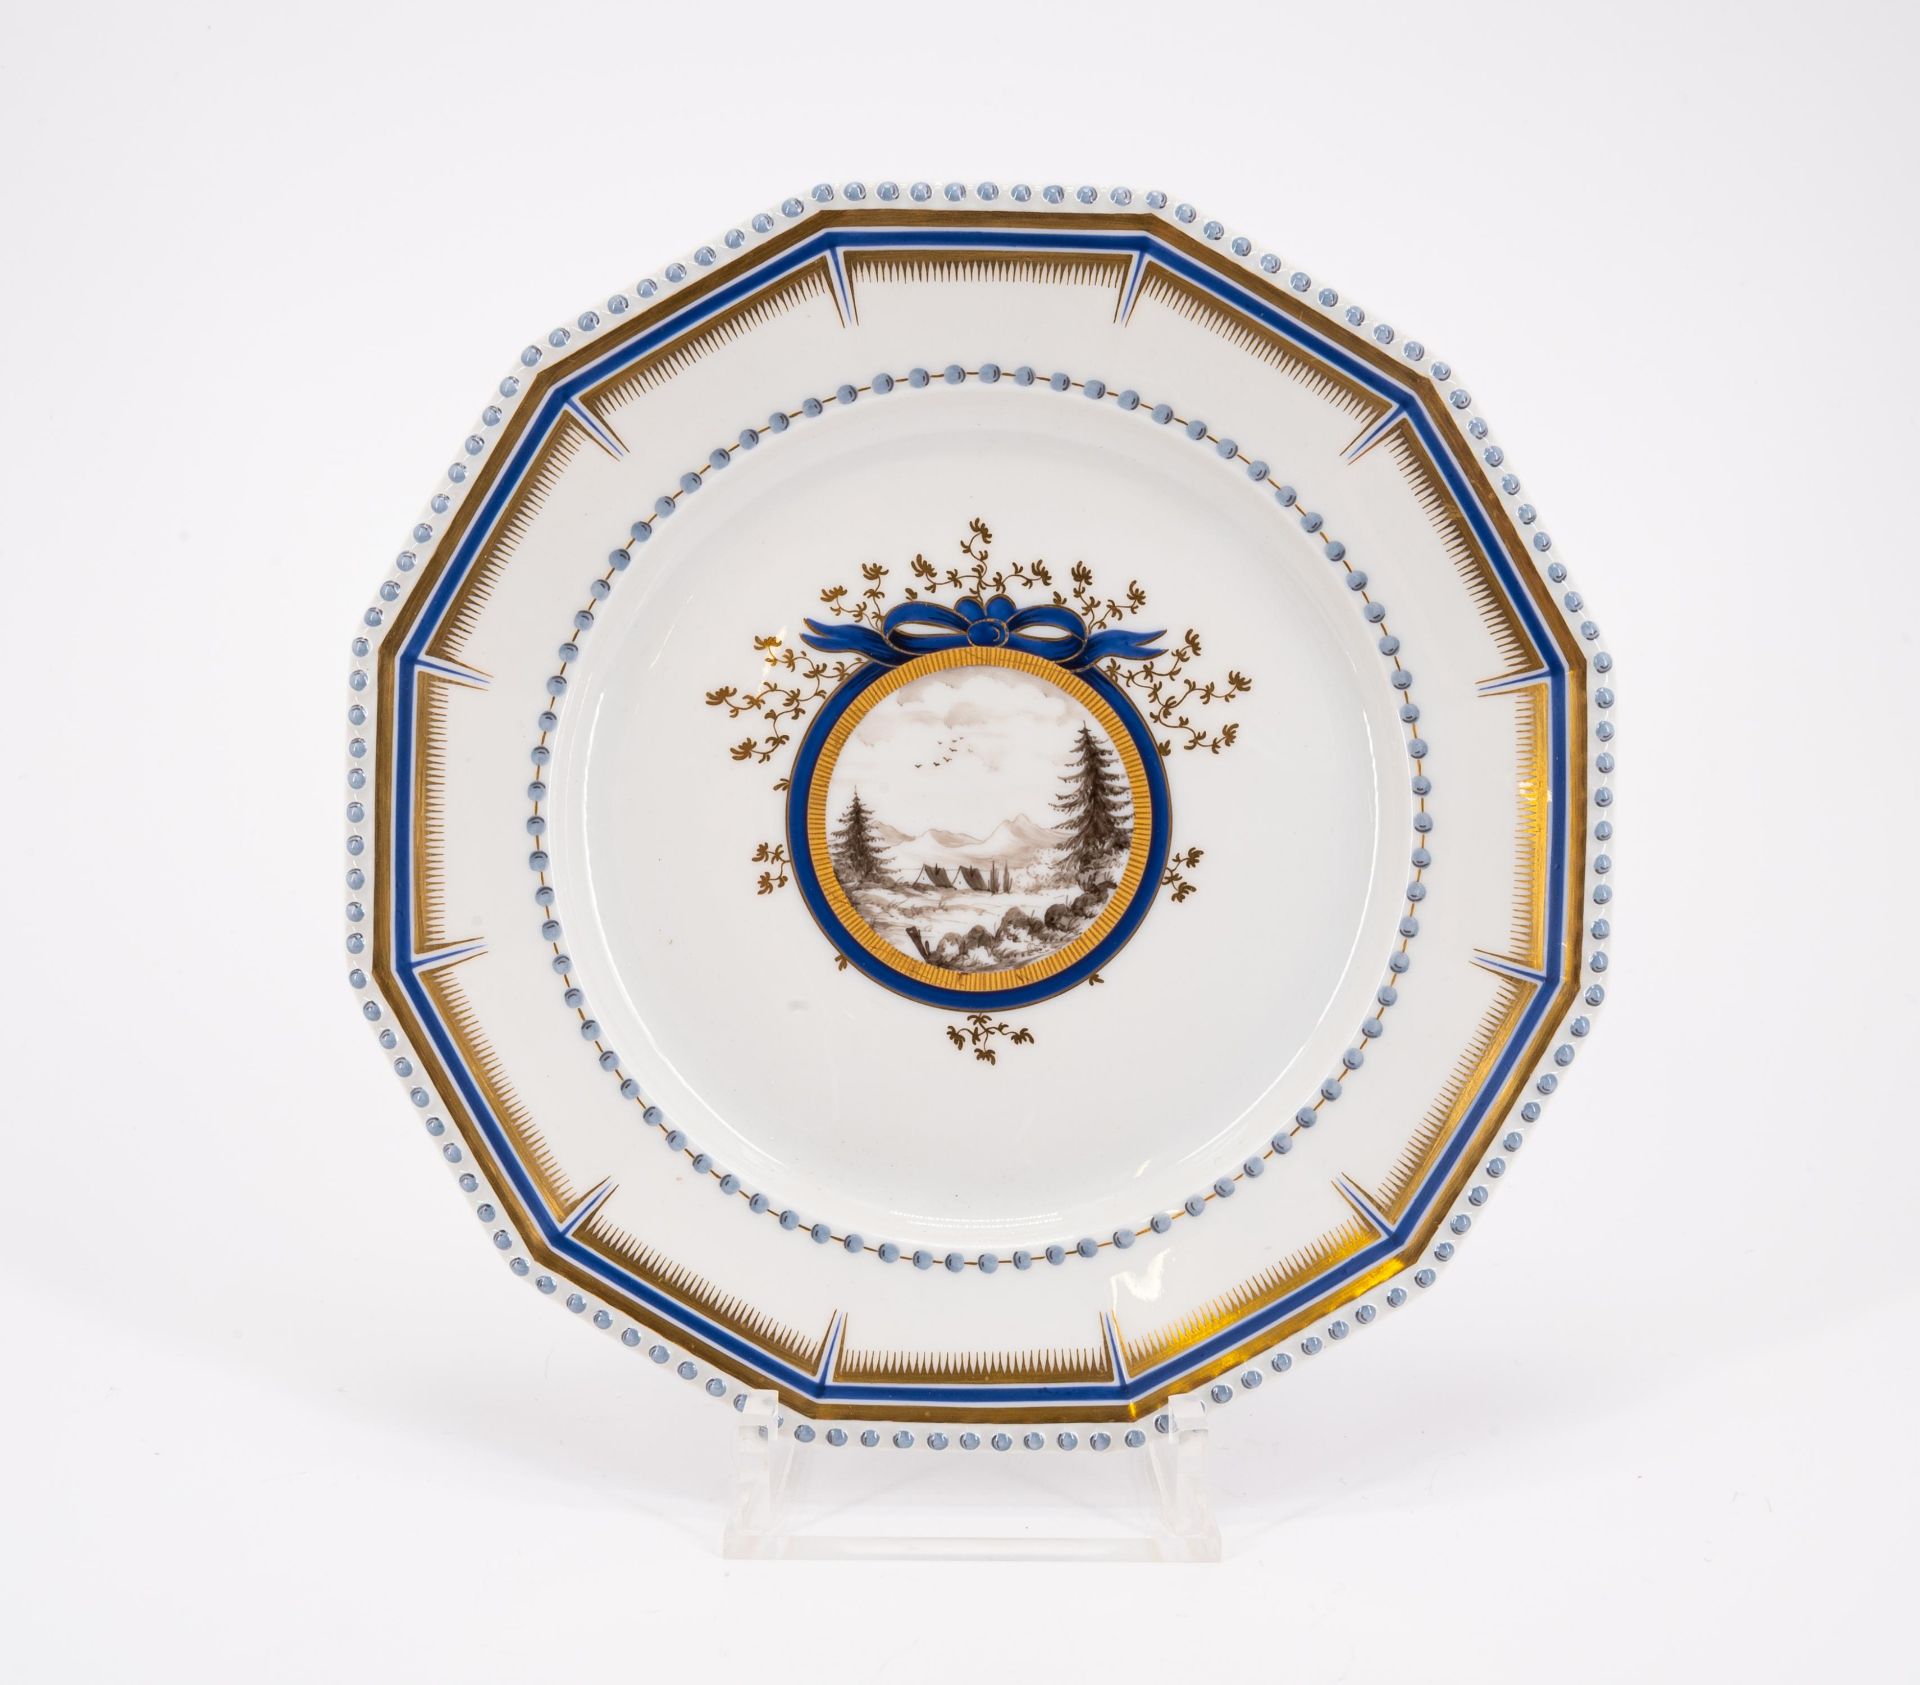 Nymphenburg: LARGE DINNER SERVICE 'ROYAL BAVARIAN' WITH 107 PIECES - Image 7 of 26